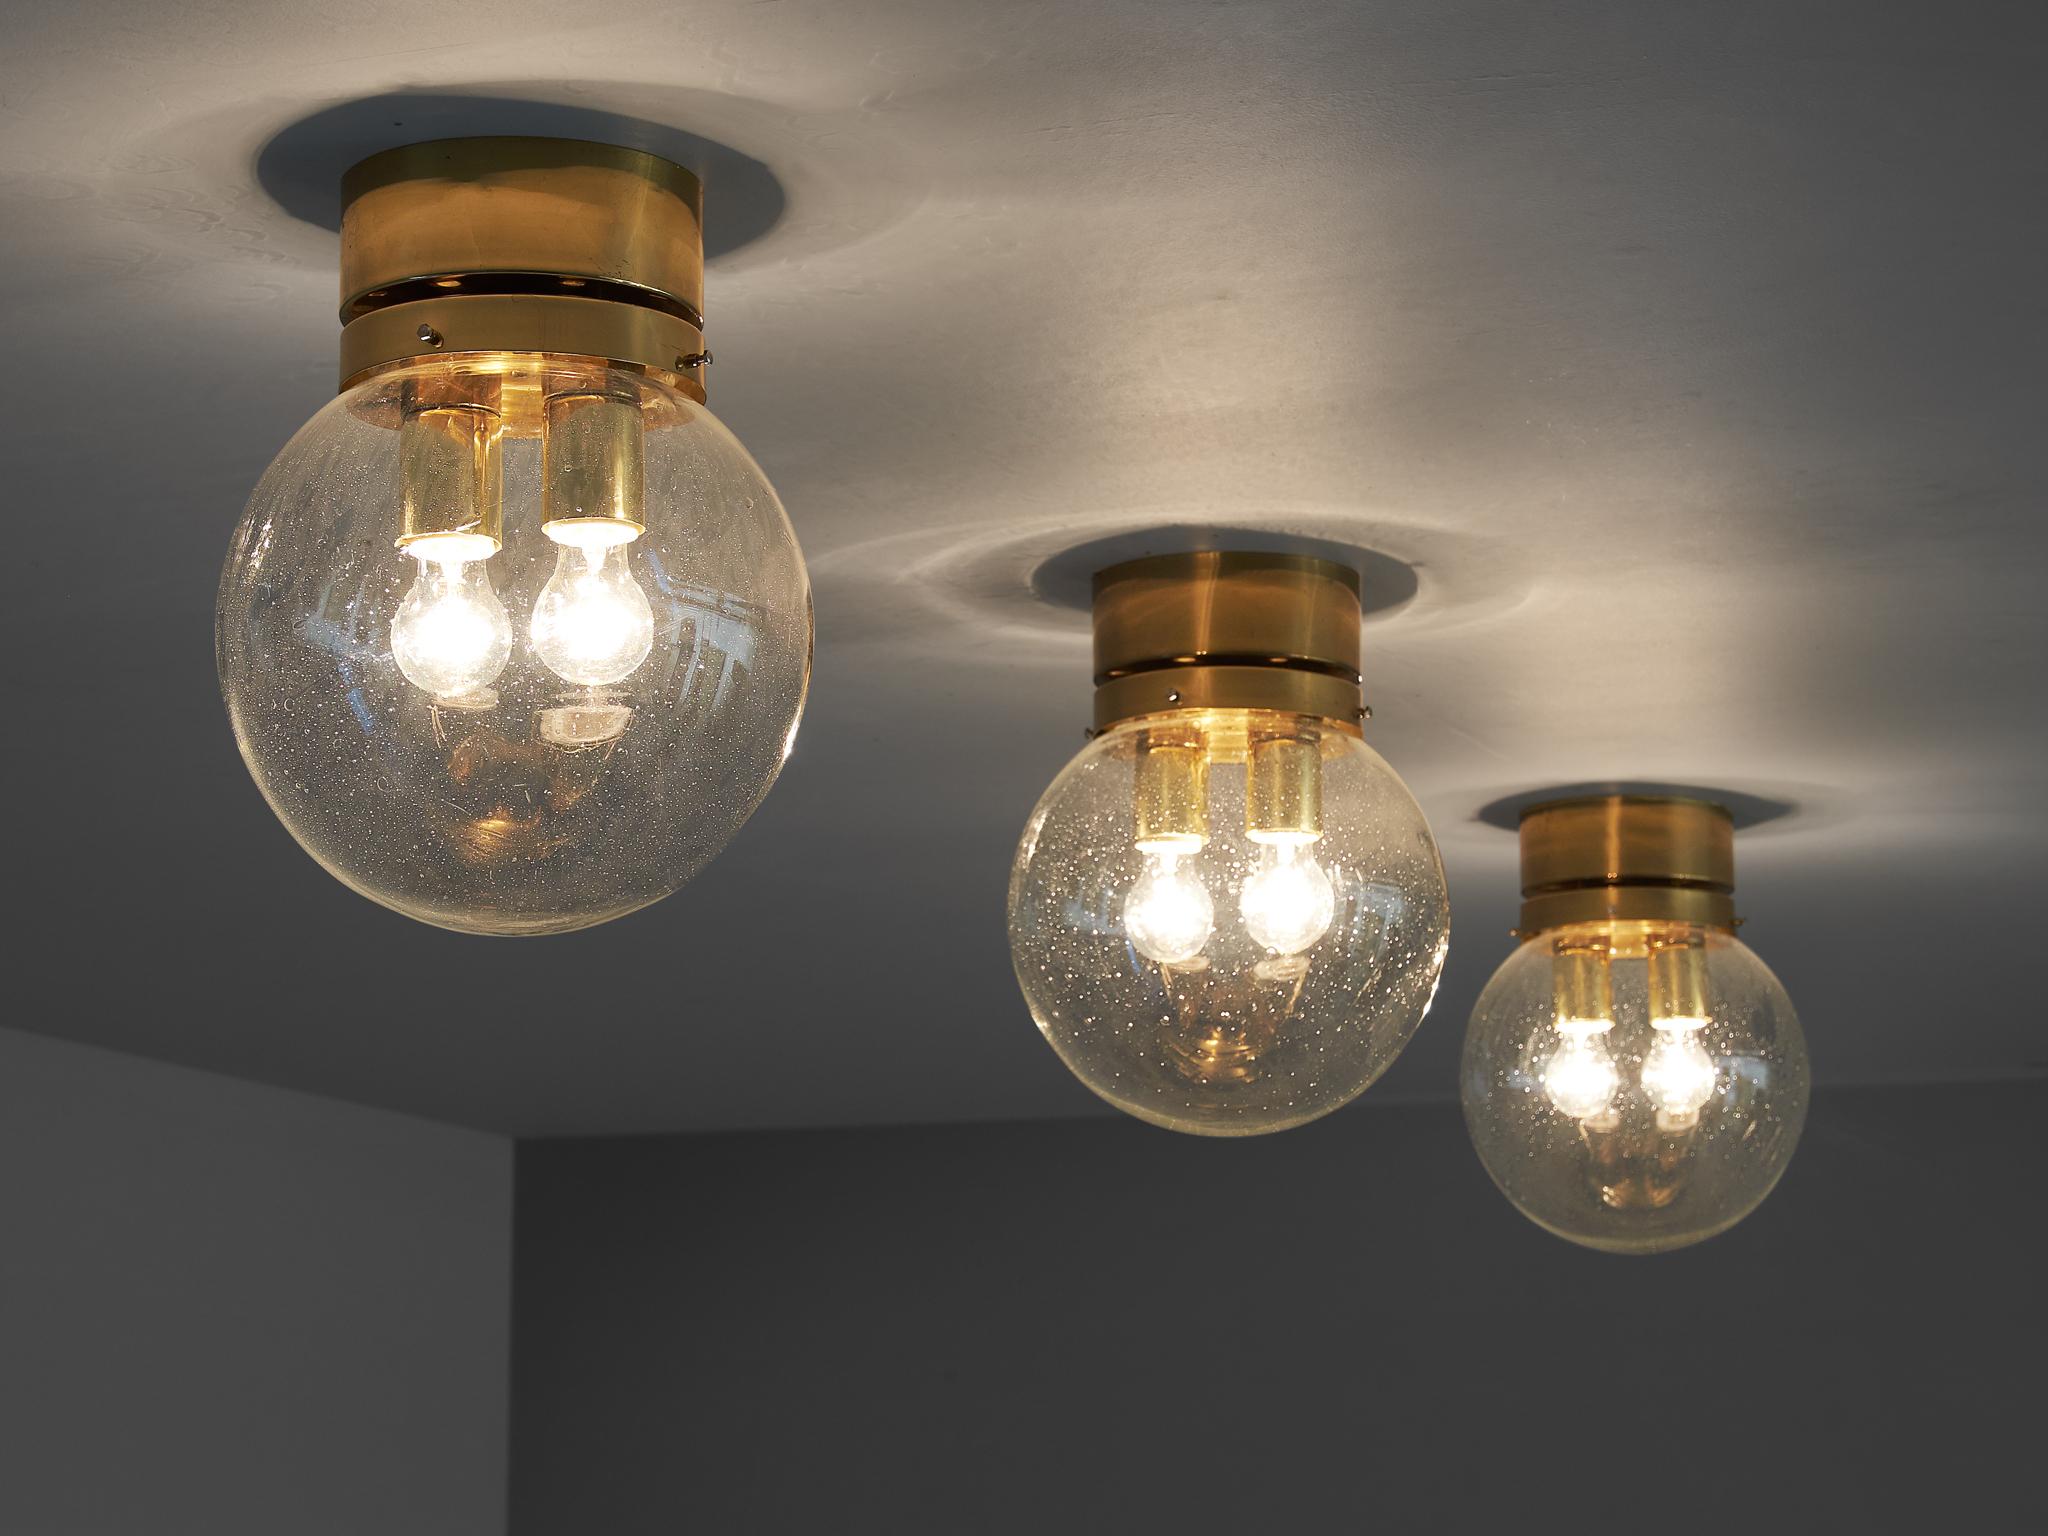 Three flush mount lights, in glass and brass, Europe, 1970s.

Set of modern and minimalistic ceiling lights in brass and glass. Each light consist of a round brass fixture and a raindrop glass sphere. Inside the sphere are two light-points. The